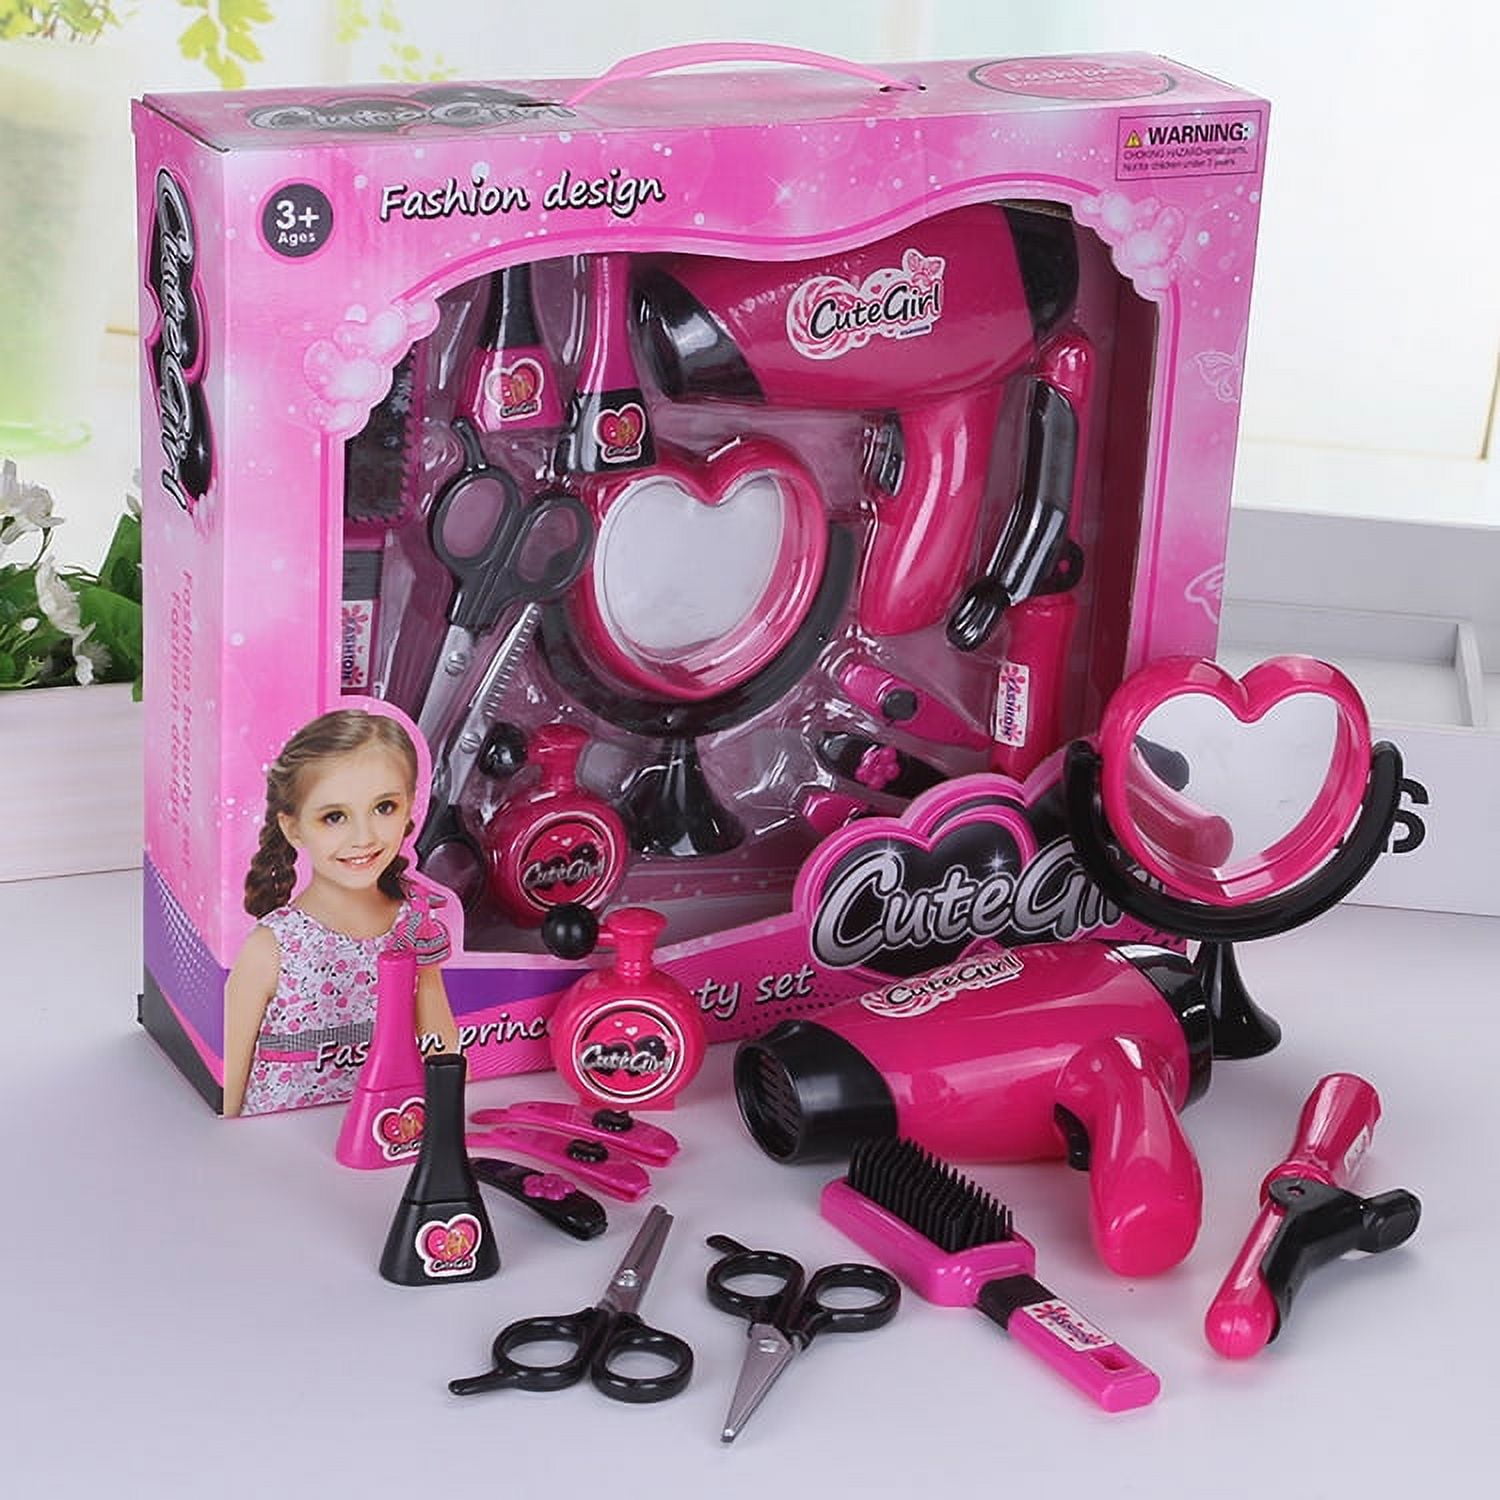  JOYIN 17Pcs Girls Beauty Salon Set, Pretend Play Doll Hair  Stylist Toy Kit with Hairdryer, Mirror, Curling Iron and Other Accessories  for Kids Toddler Fashion Cutting Makeup Party Favor, Birthday Gift 